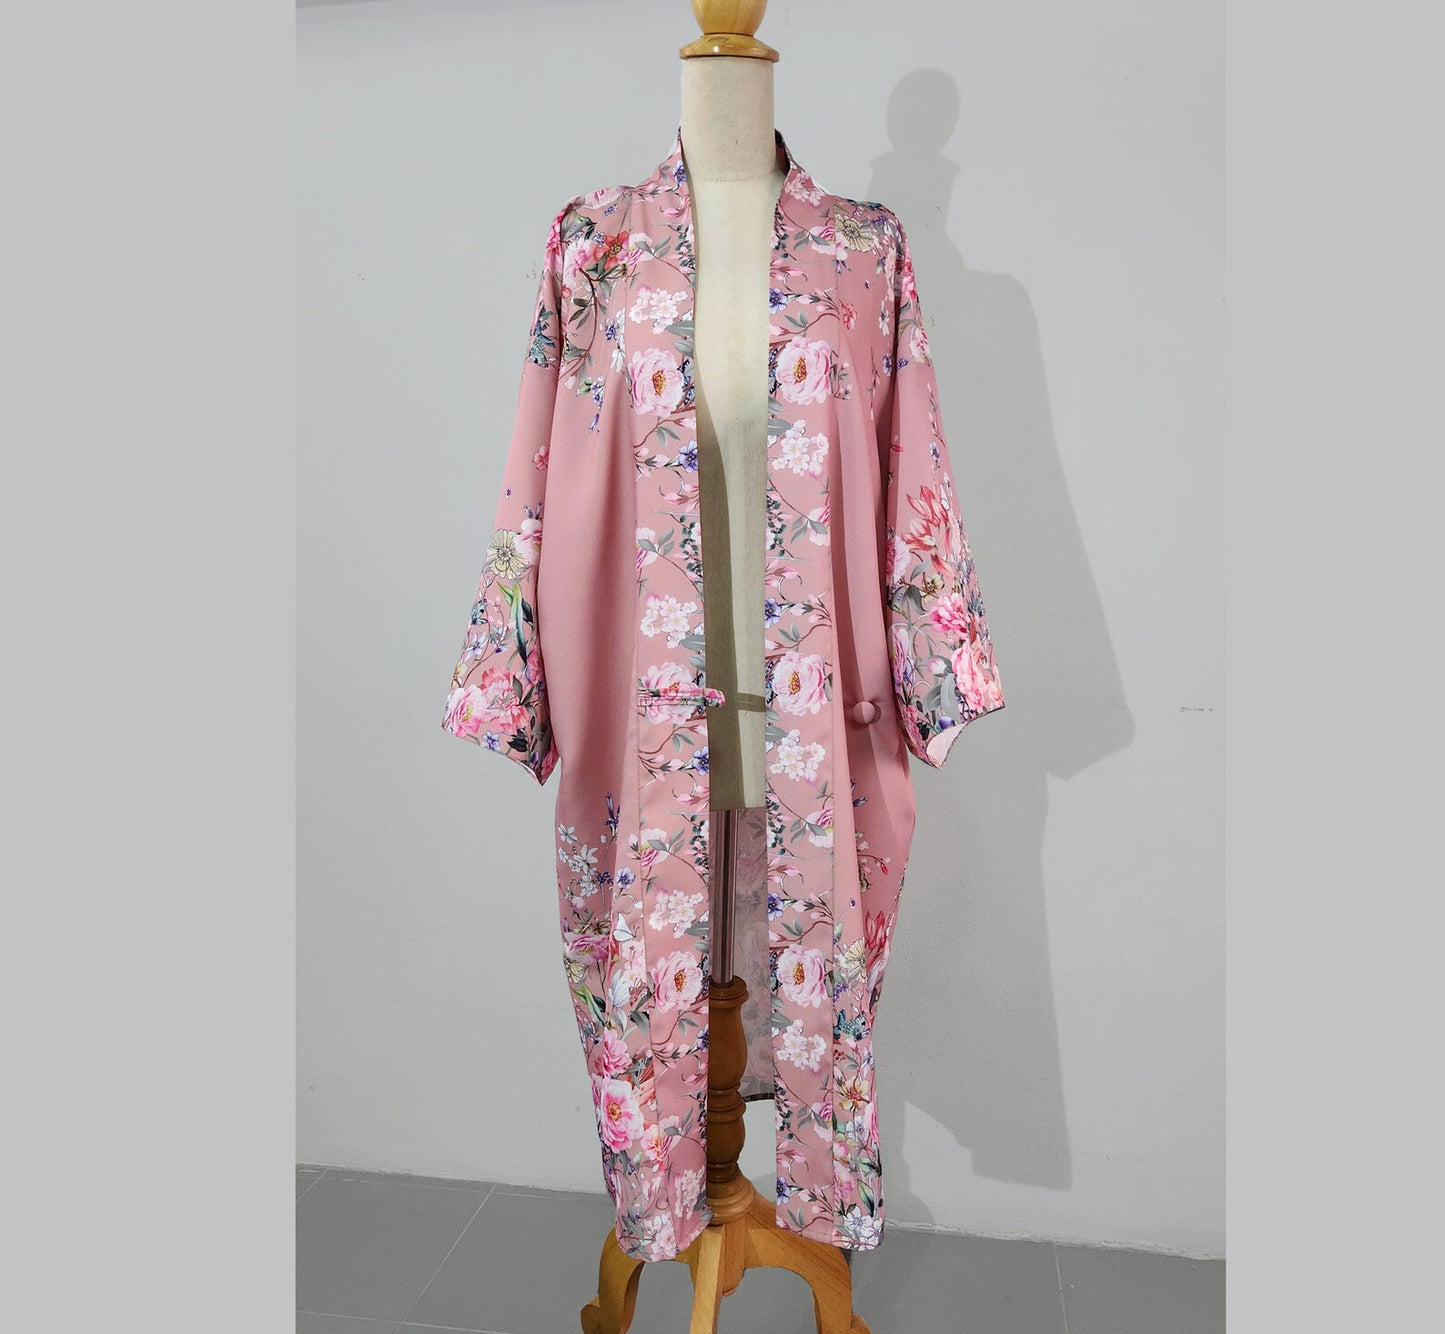 Floral mauve pink kimono robe, inspired by 1920s loungewear